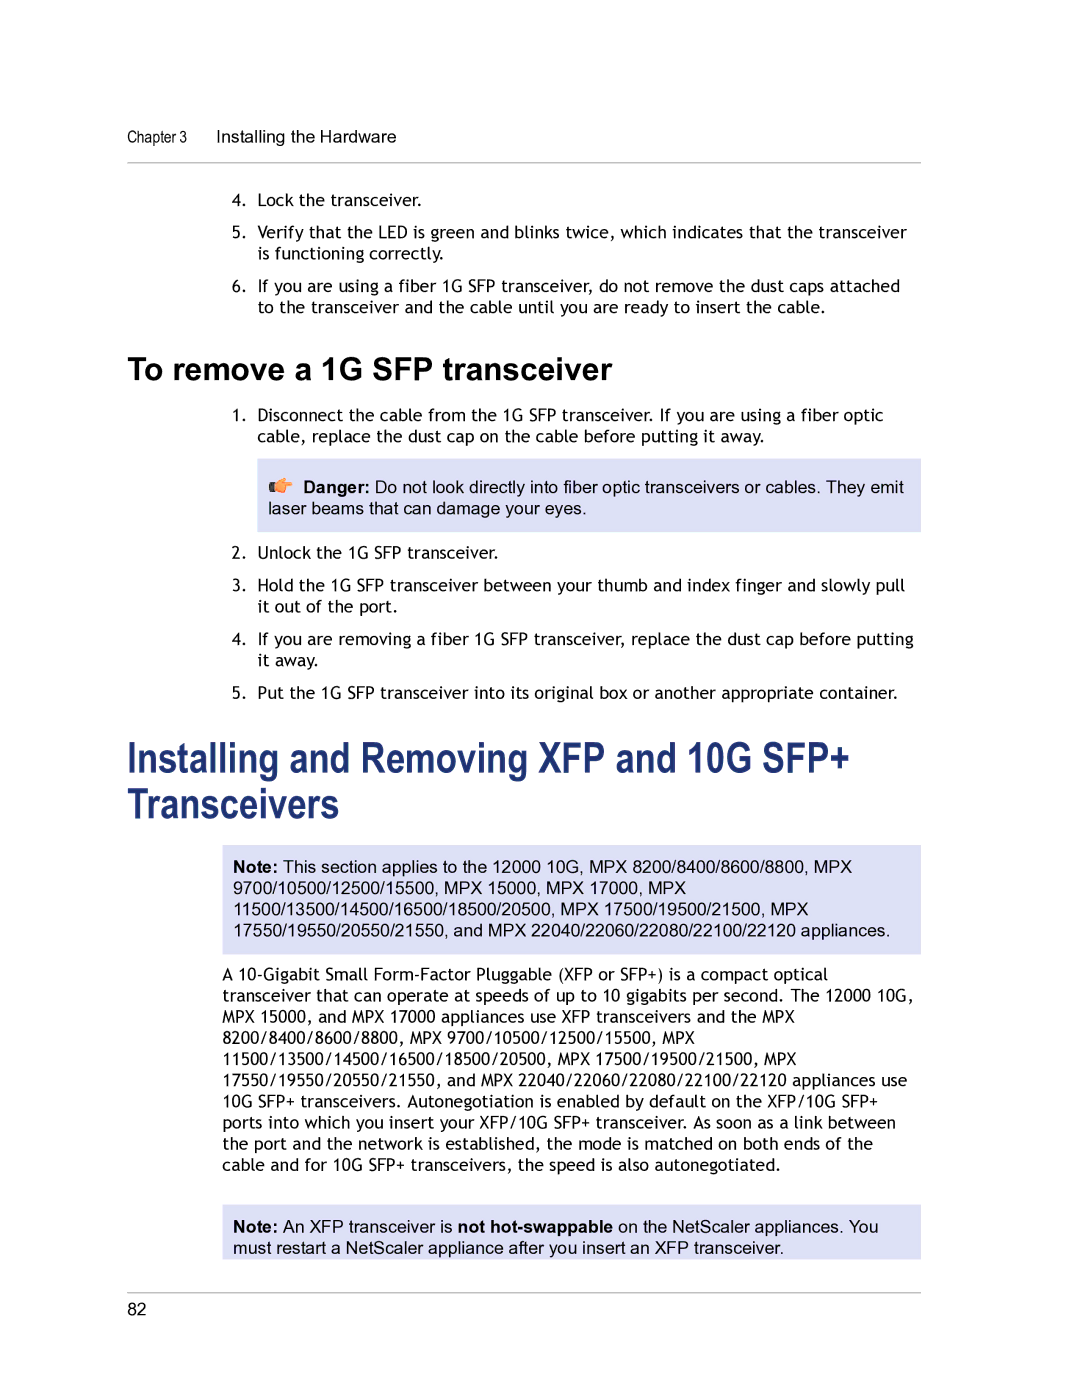 Citrix Systems 9.3 setup guide Installing and Removing XFP and 10G SFP+ Transceivers, To remove a 1G SFP transceiver 